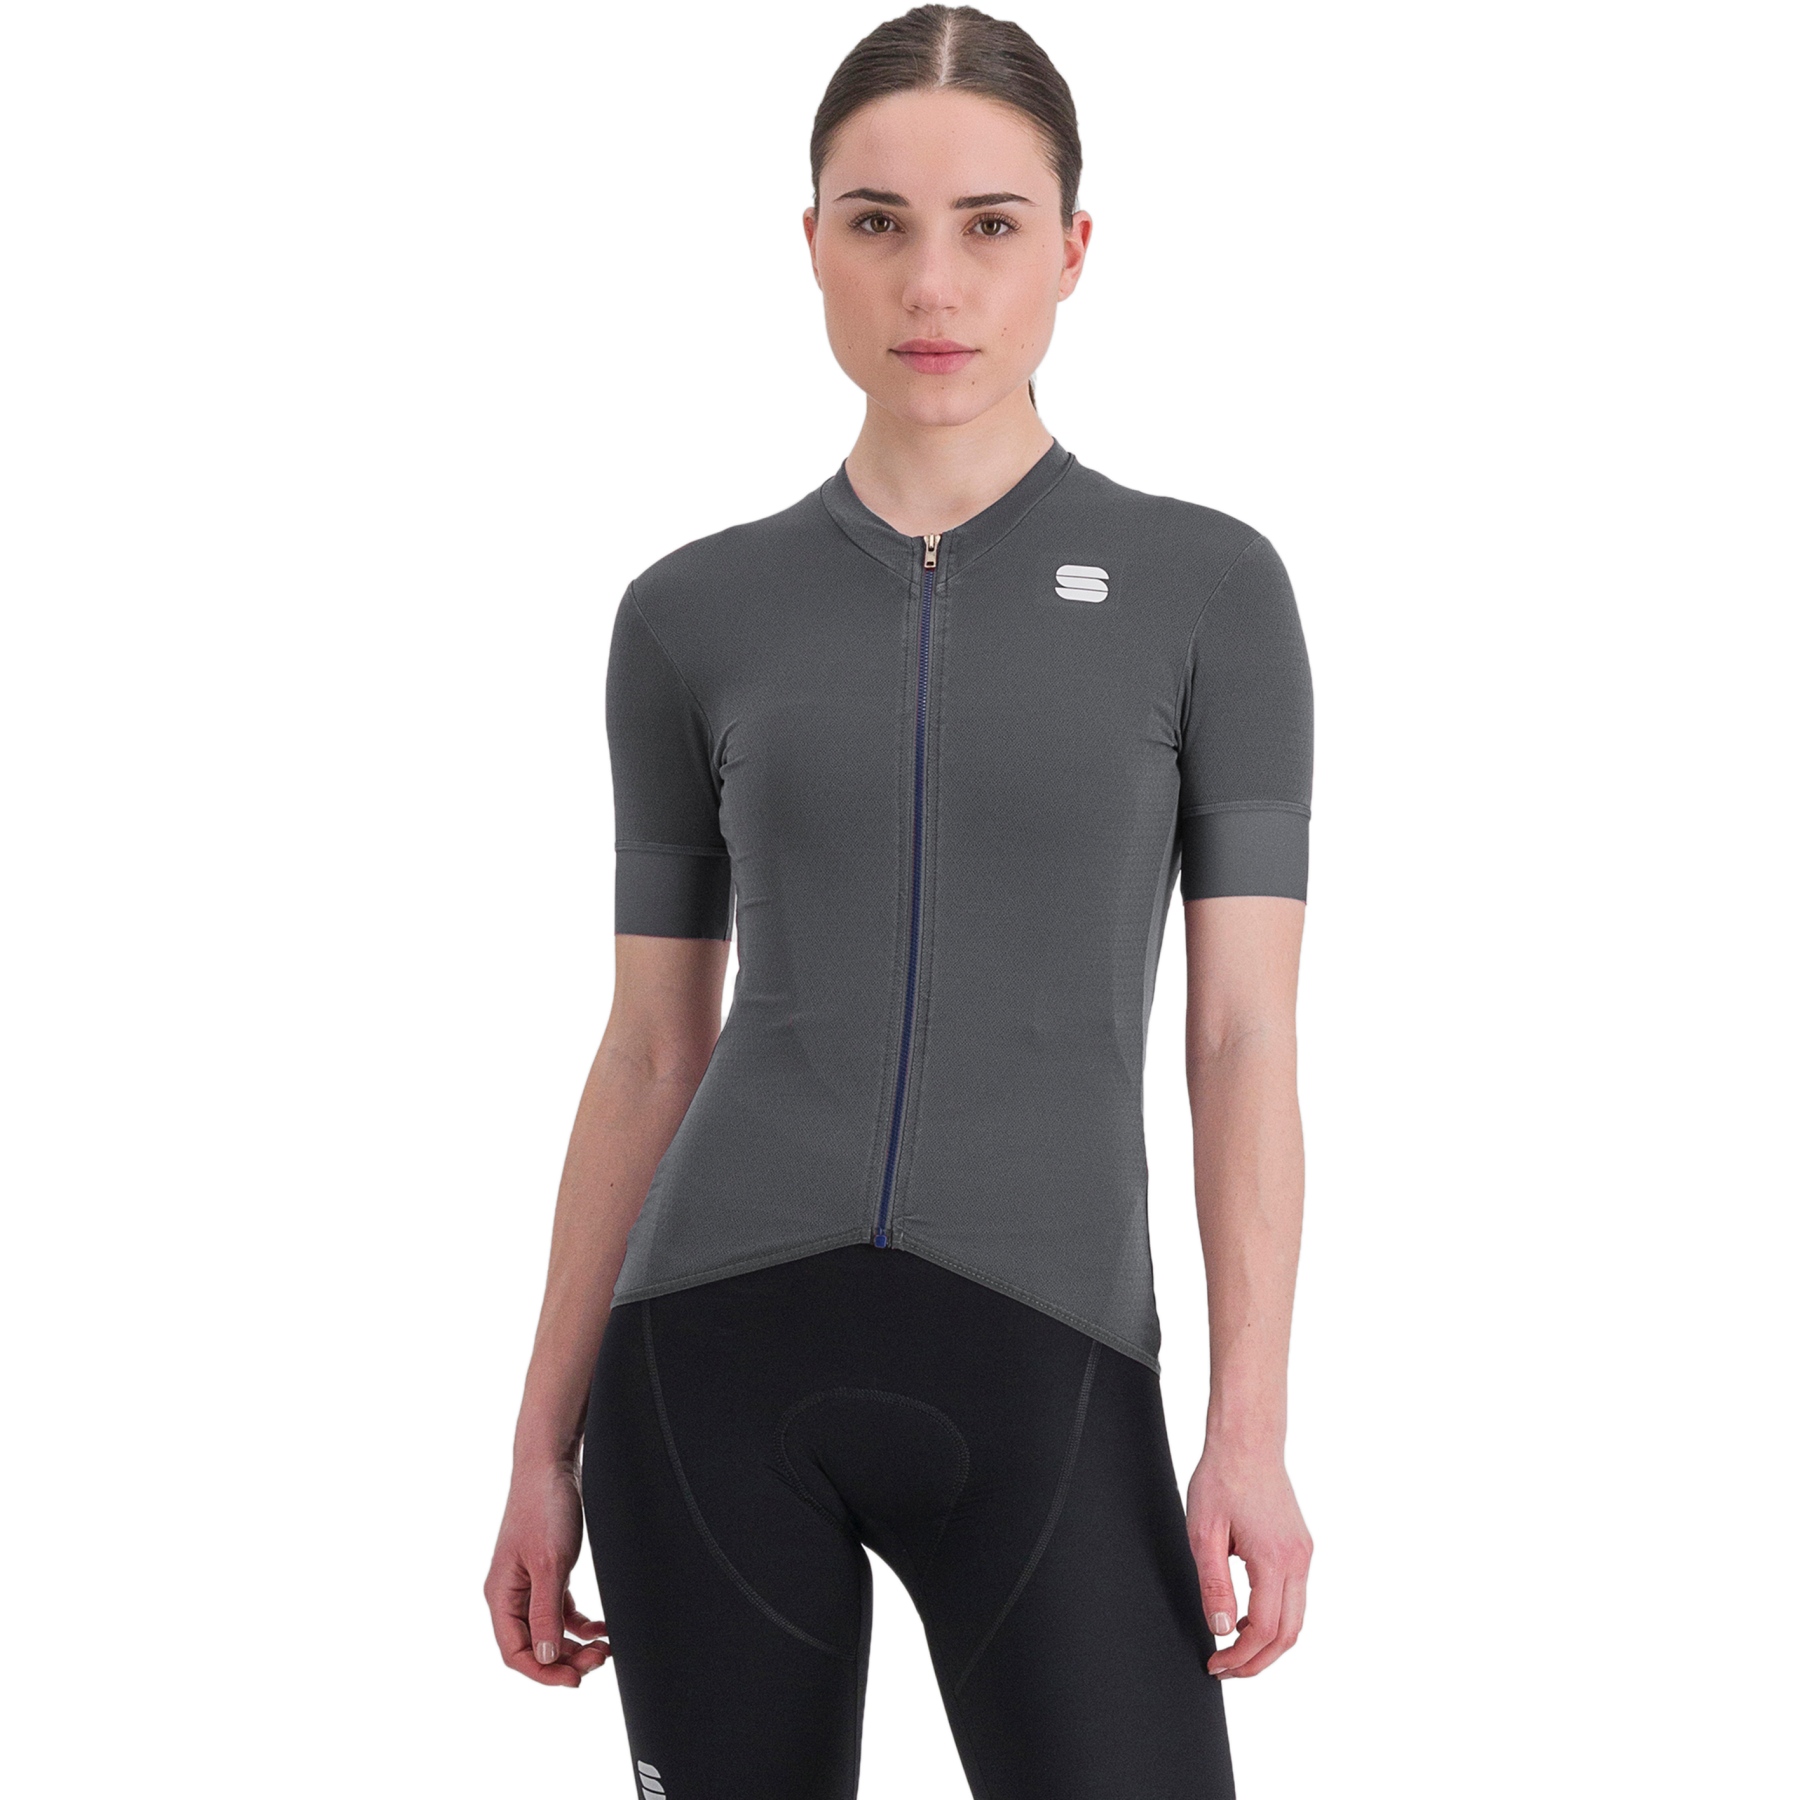 Image of Sportful Monocrom Women Jersey - 168 Anthracite